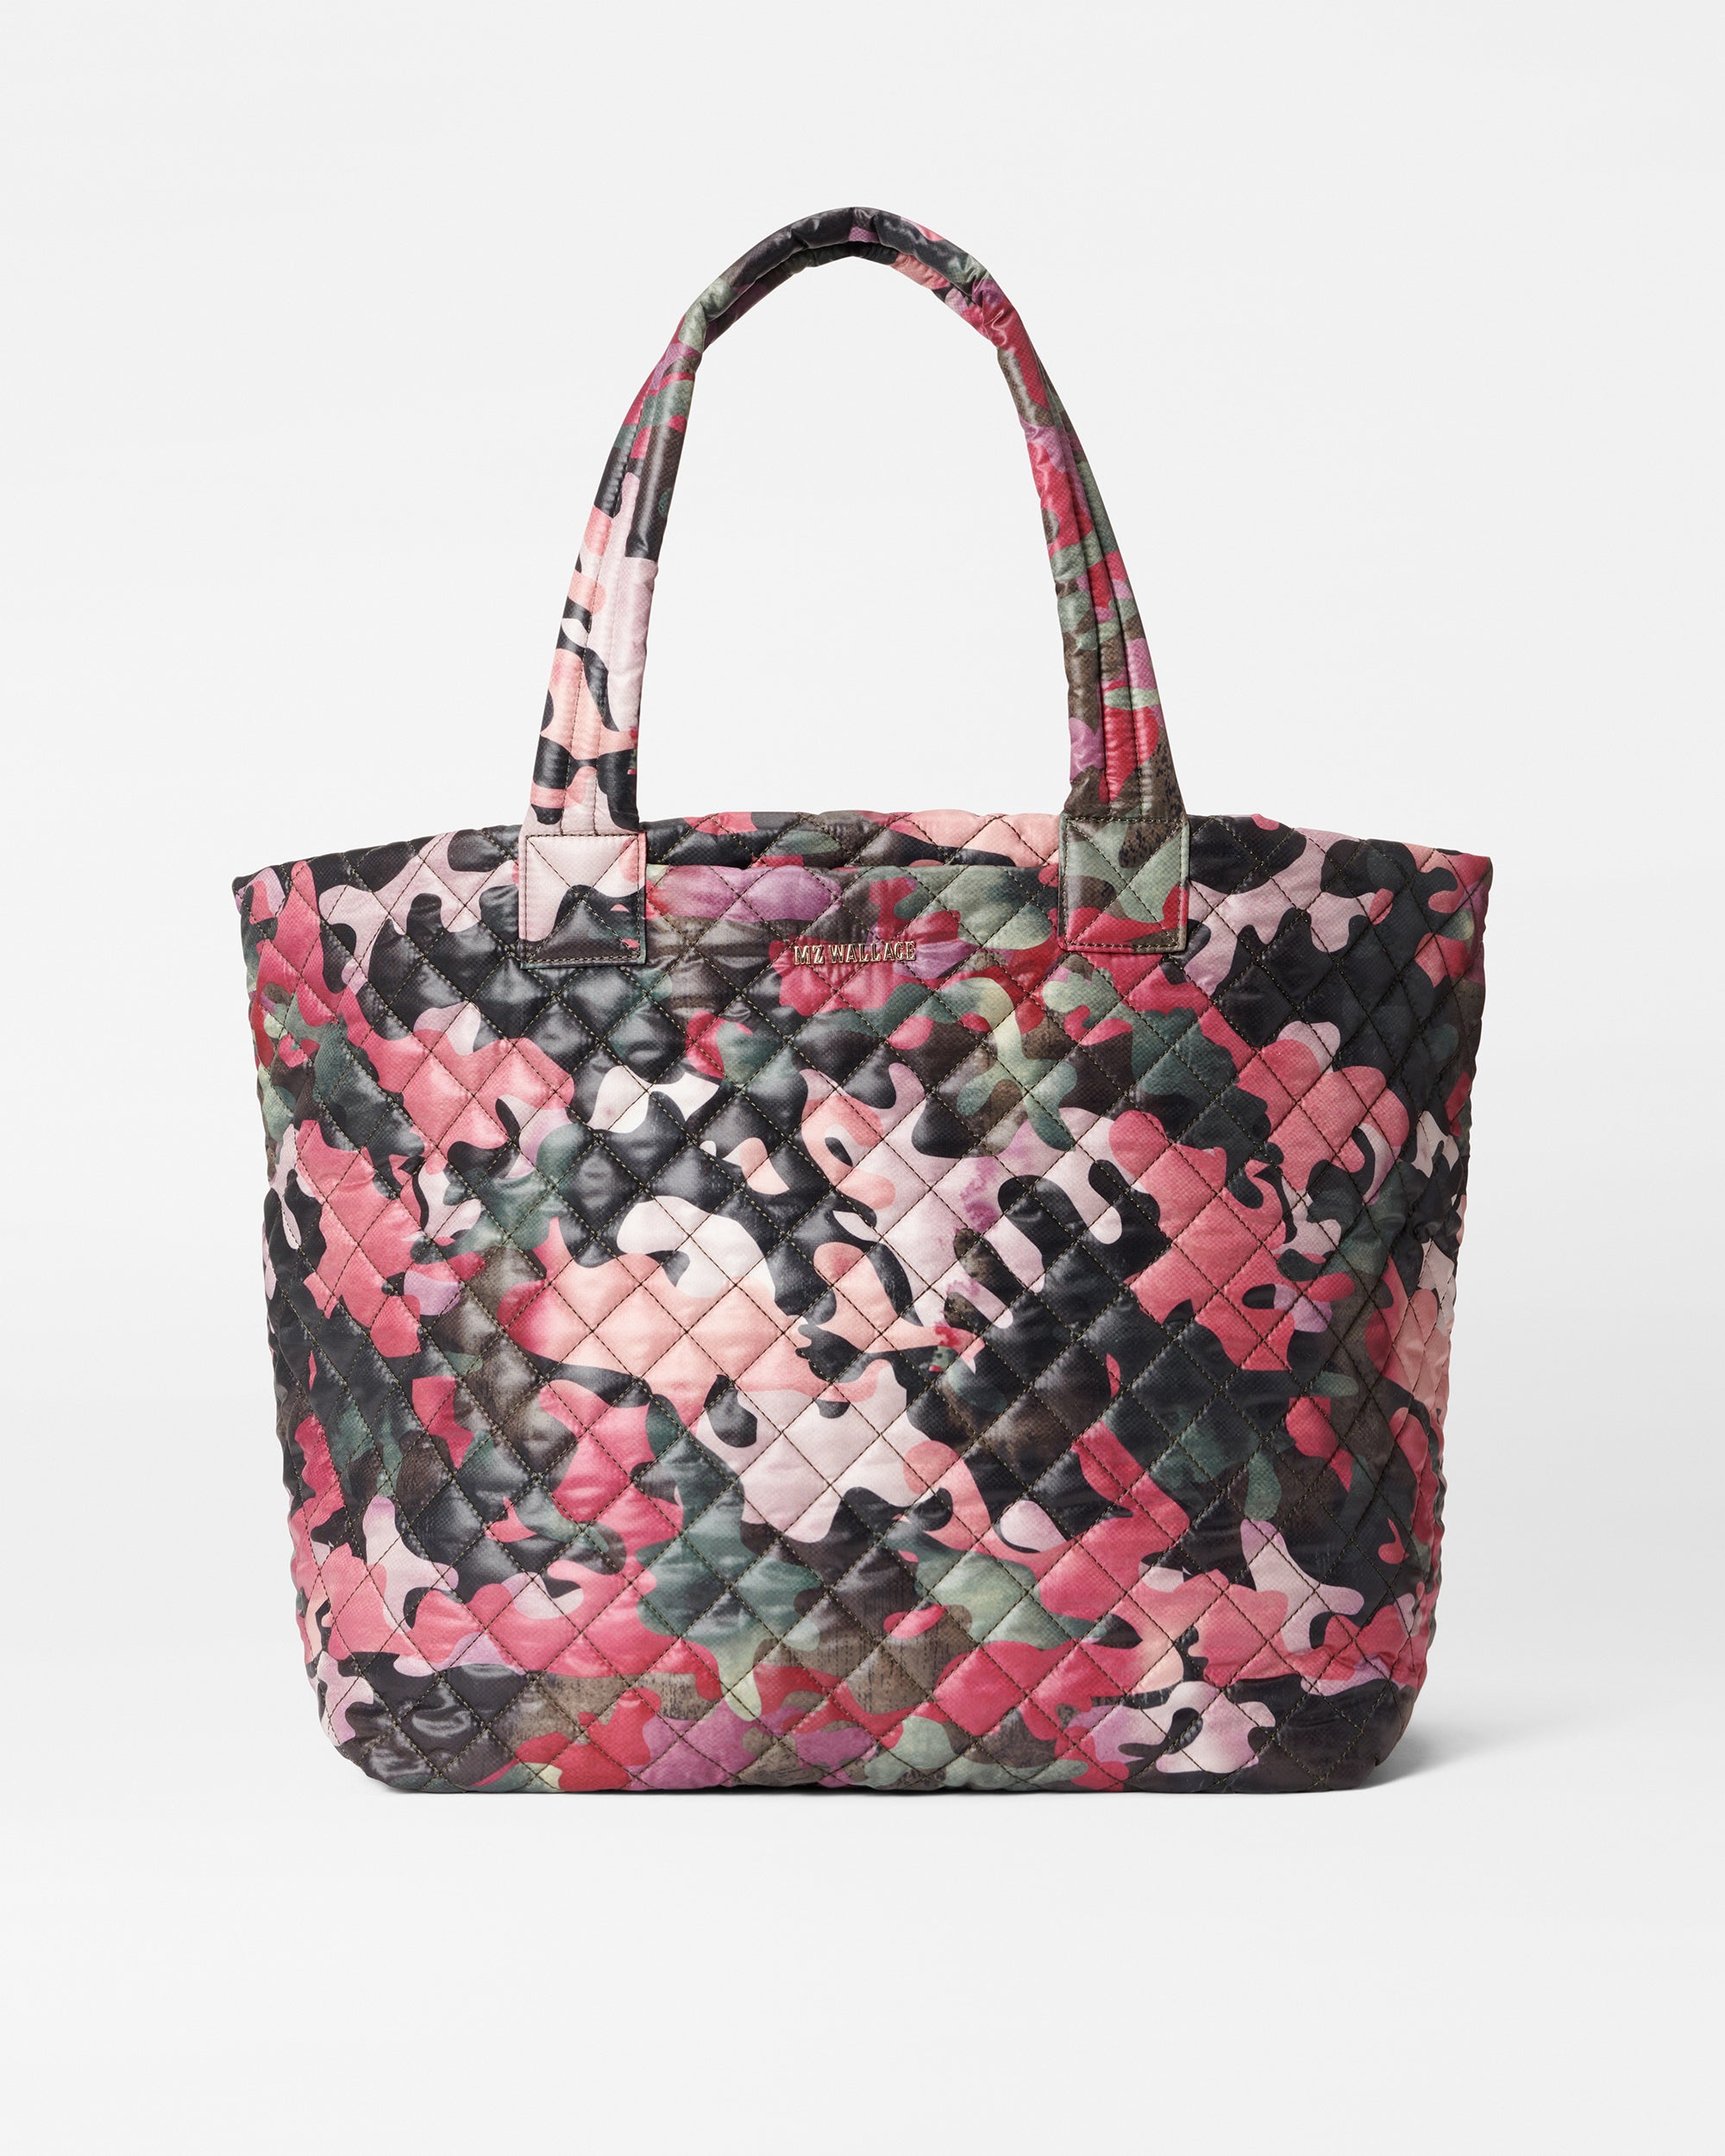 MZ WALLACE Metro Deluxe Medium Quilted Tote Bag